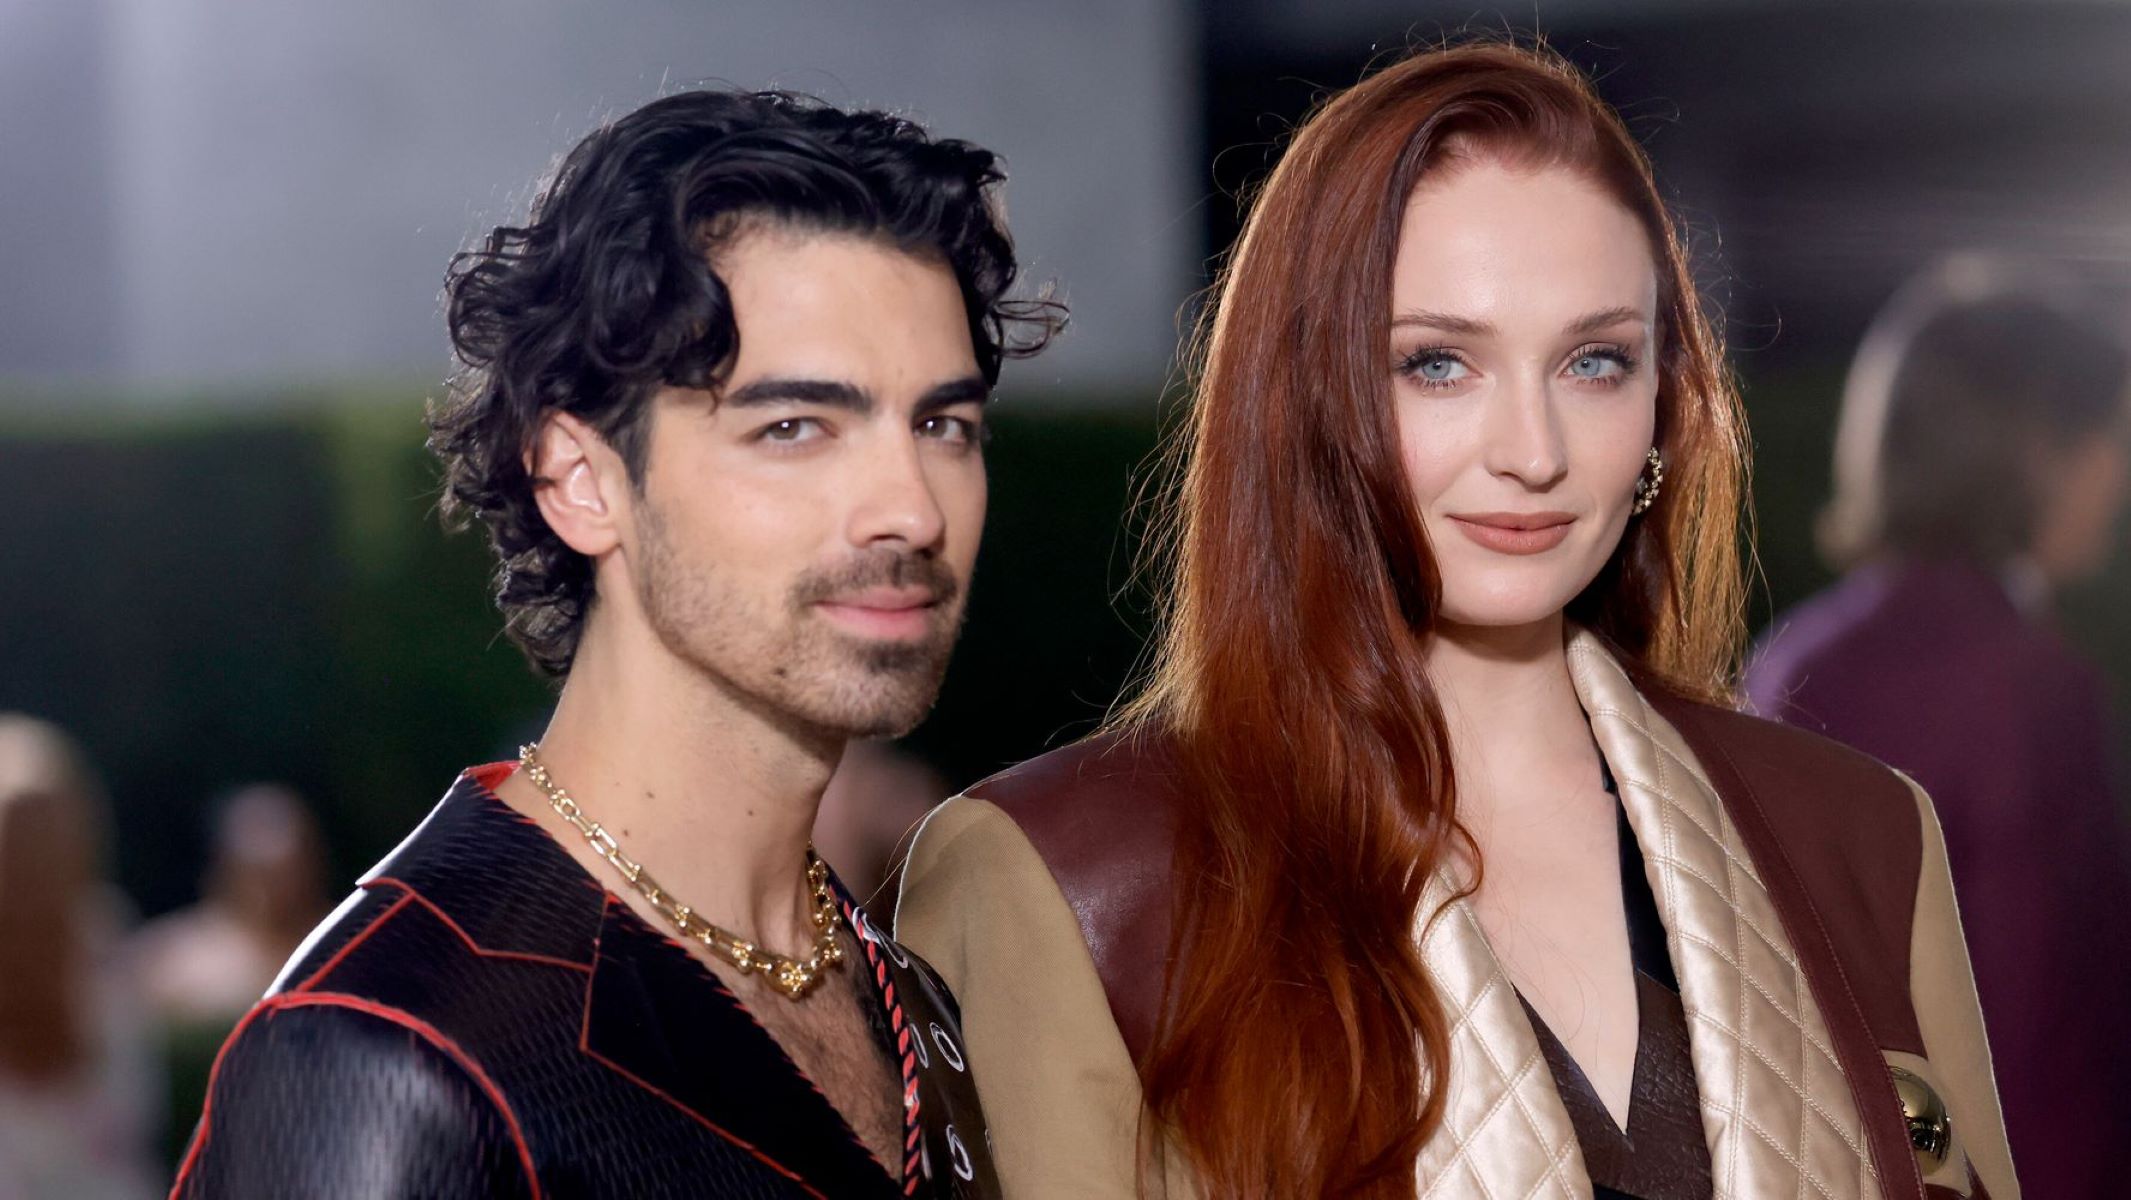 New Development In Joe Jonas And Sophie Turner’s Divorce: Kids Cannot Be Taken Out Of The Country